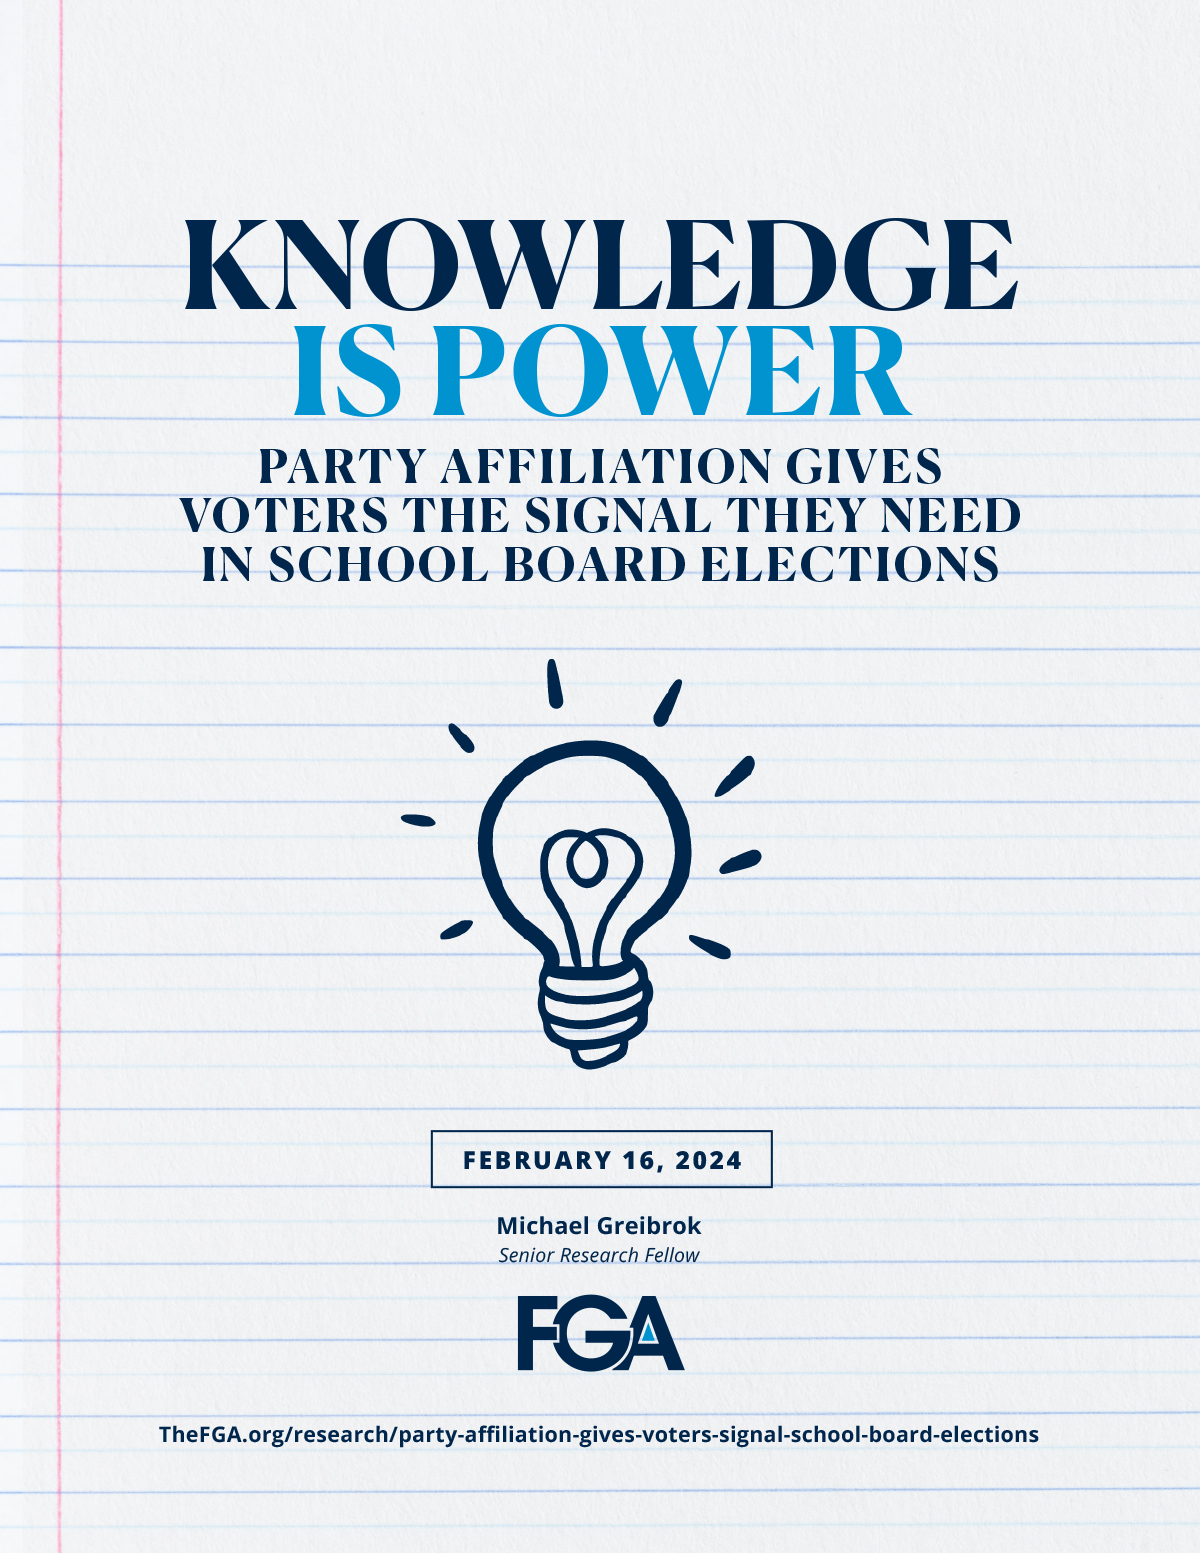 Knowledge Is Power: Party Affiliation Gives Voters the Signal They Need in School Board Elections